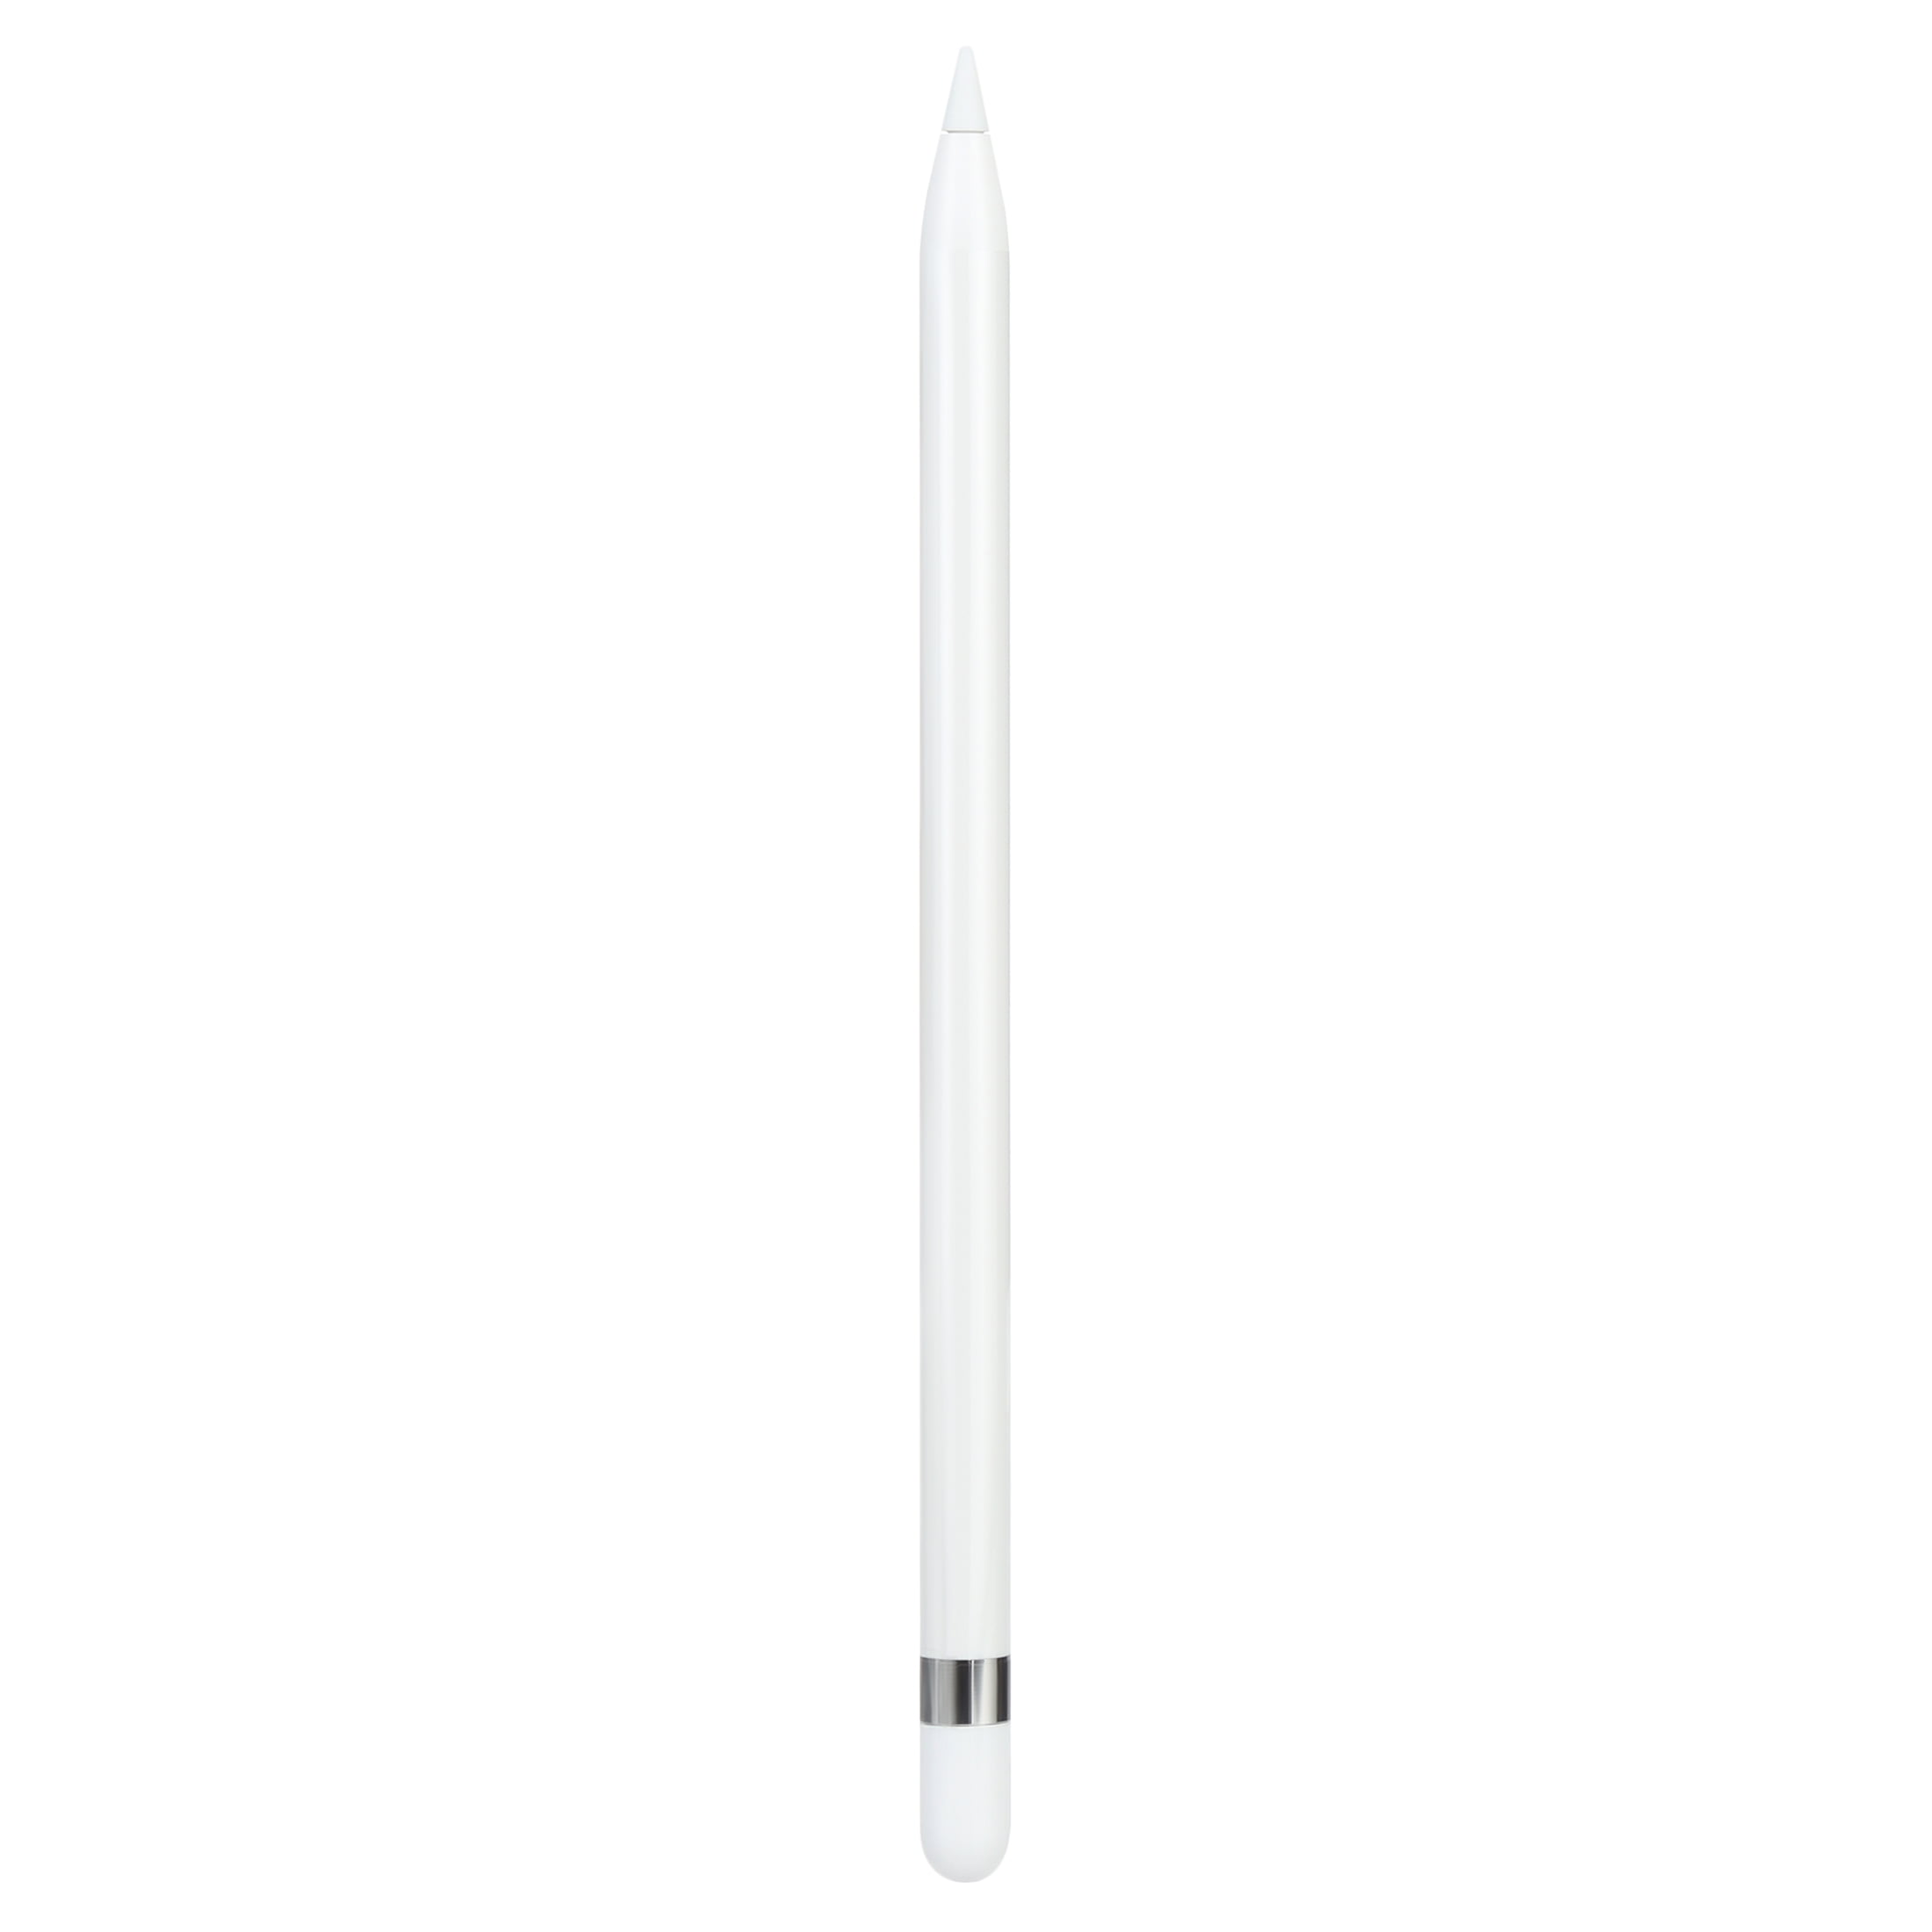 Buy Apple Pencil (1st Generation) Online at Lowest Price in Ubuy 